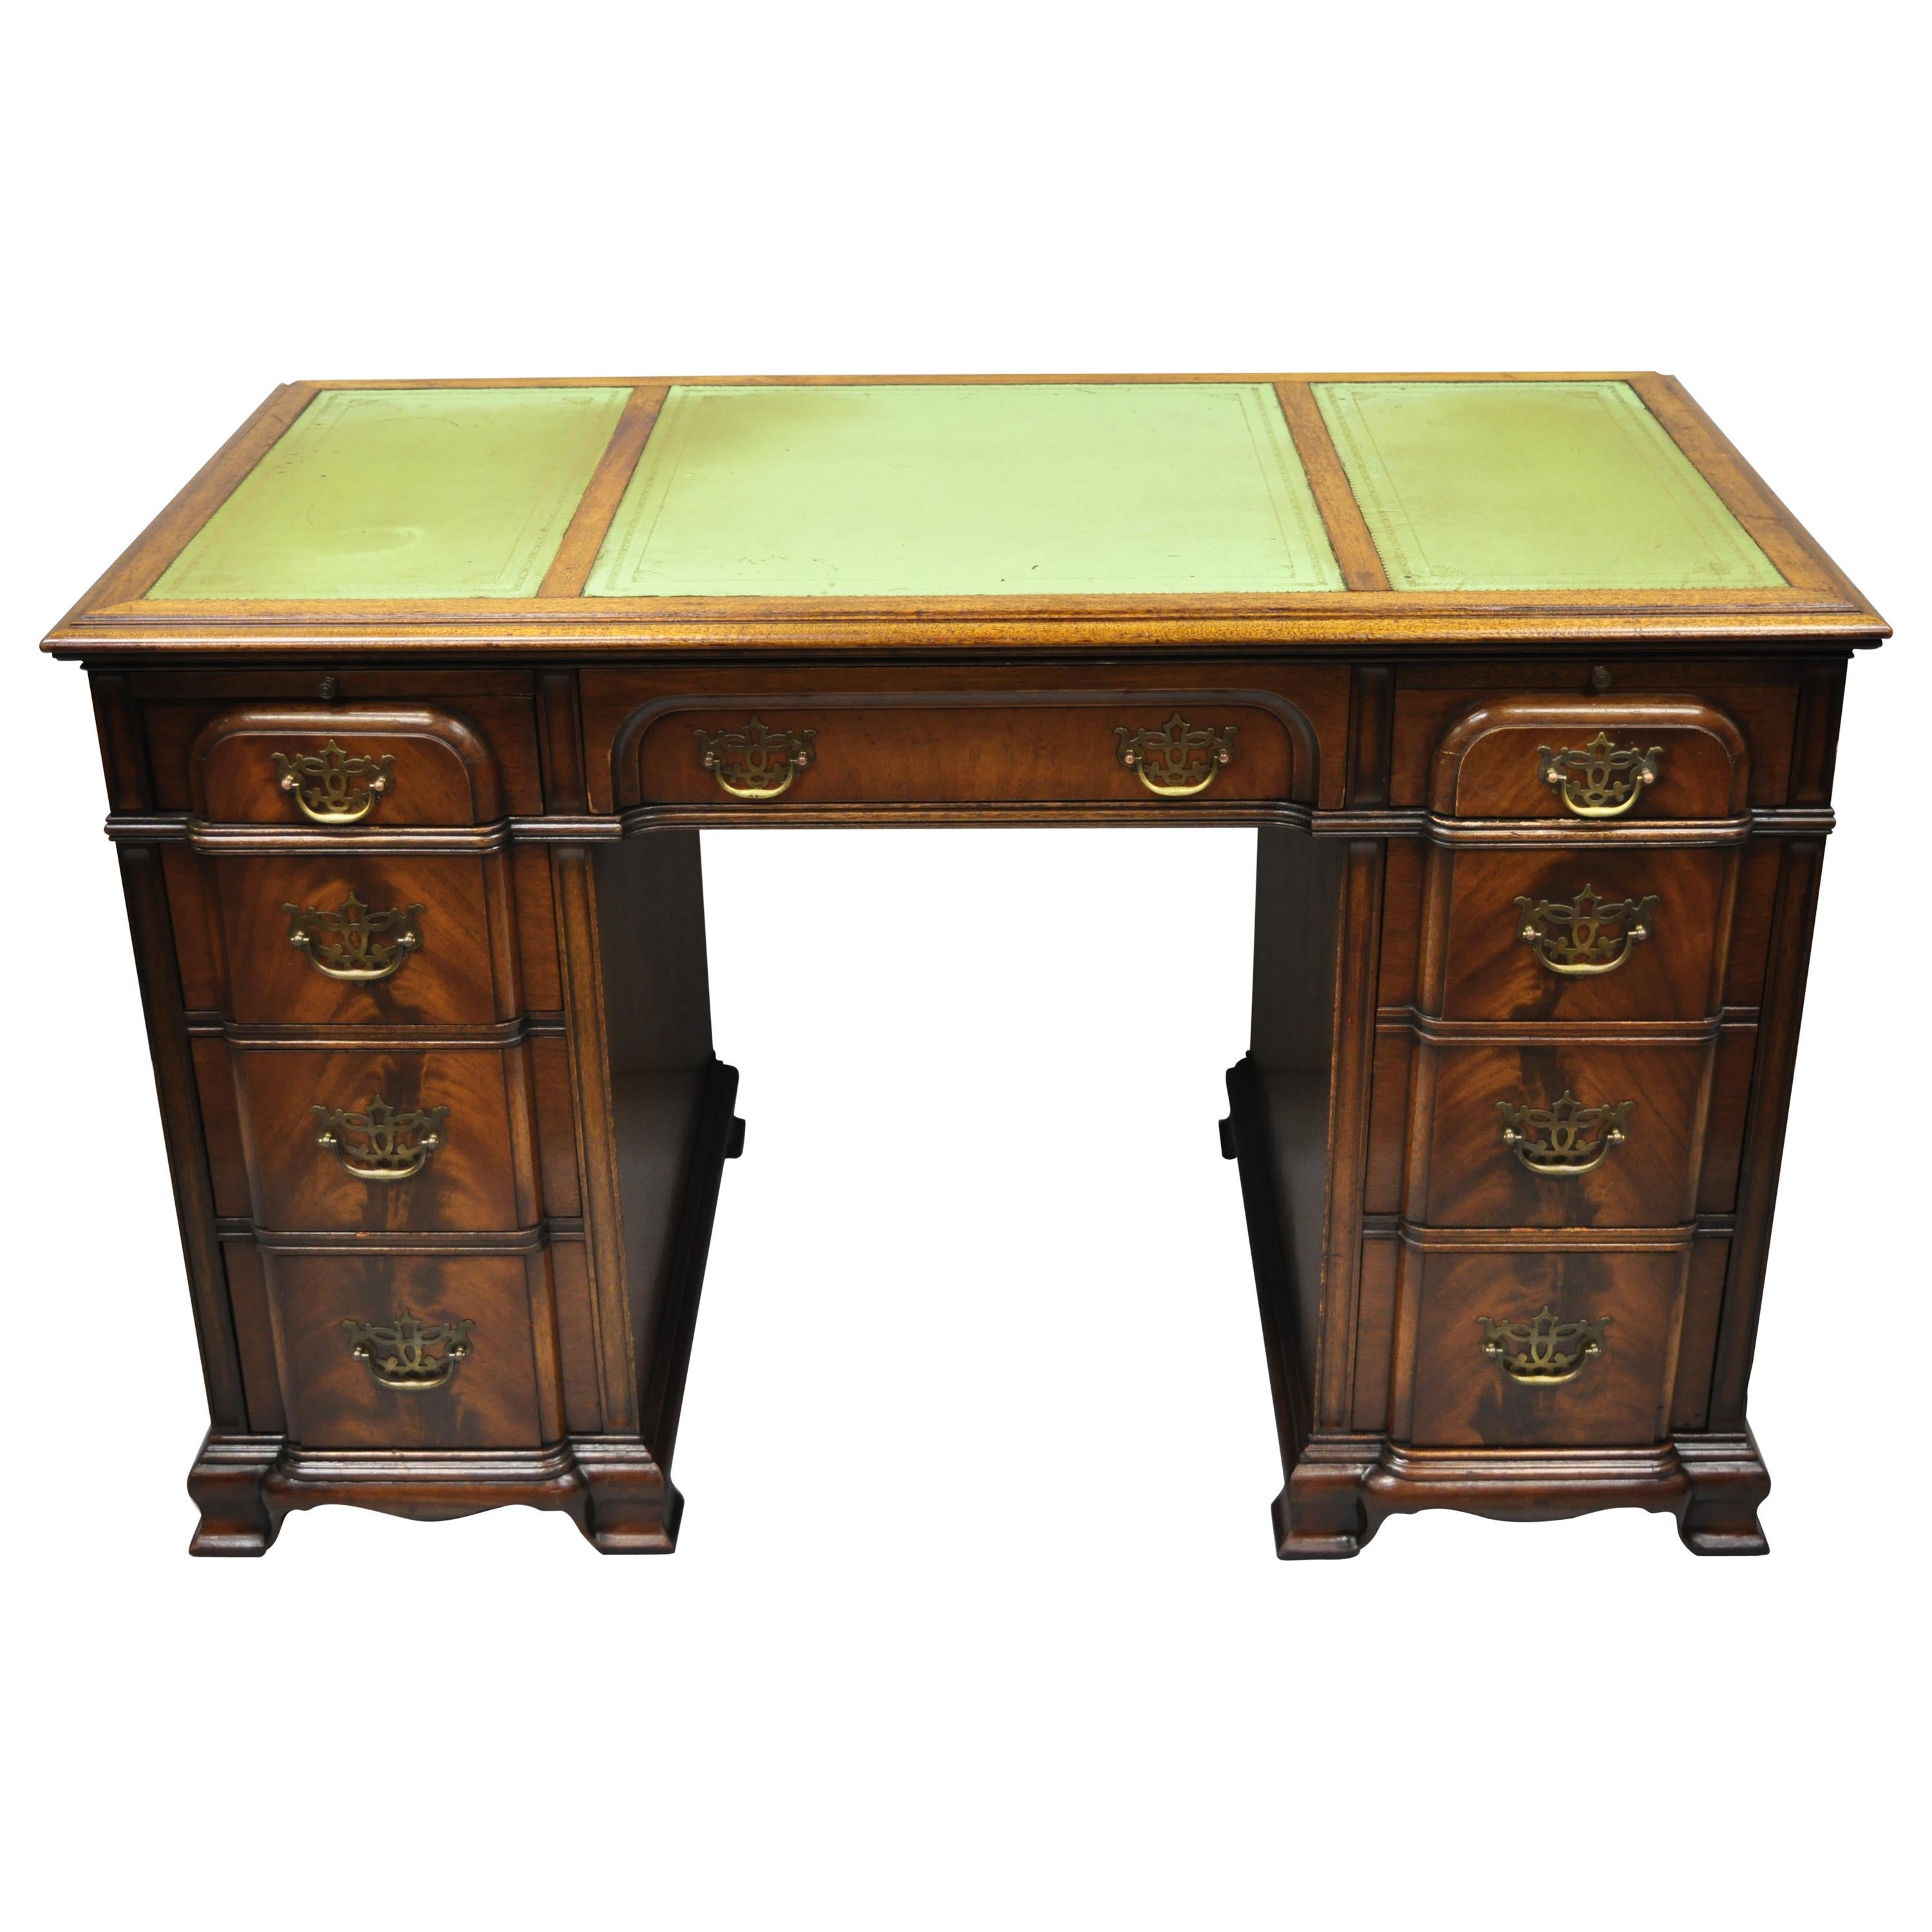 Crotch Mahogany Chippendale Block Front Green Leather Top Knee Hole Writing Desk